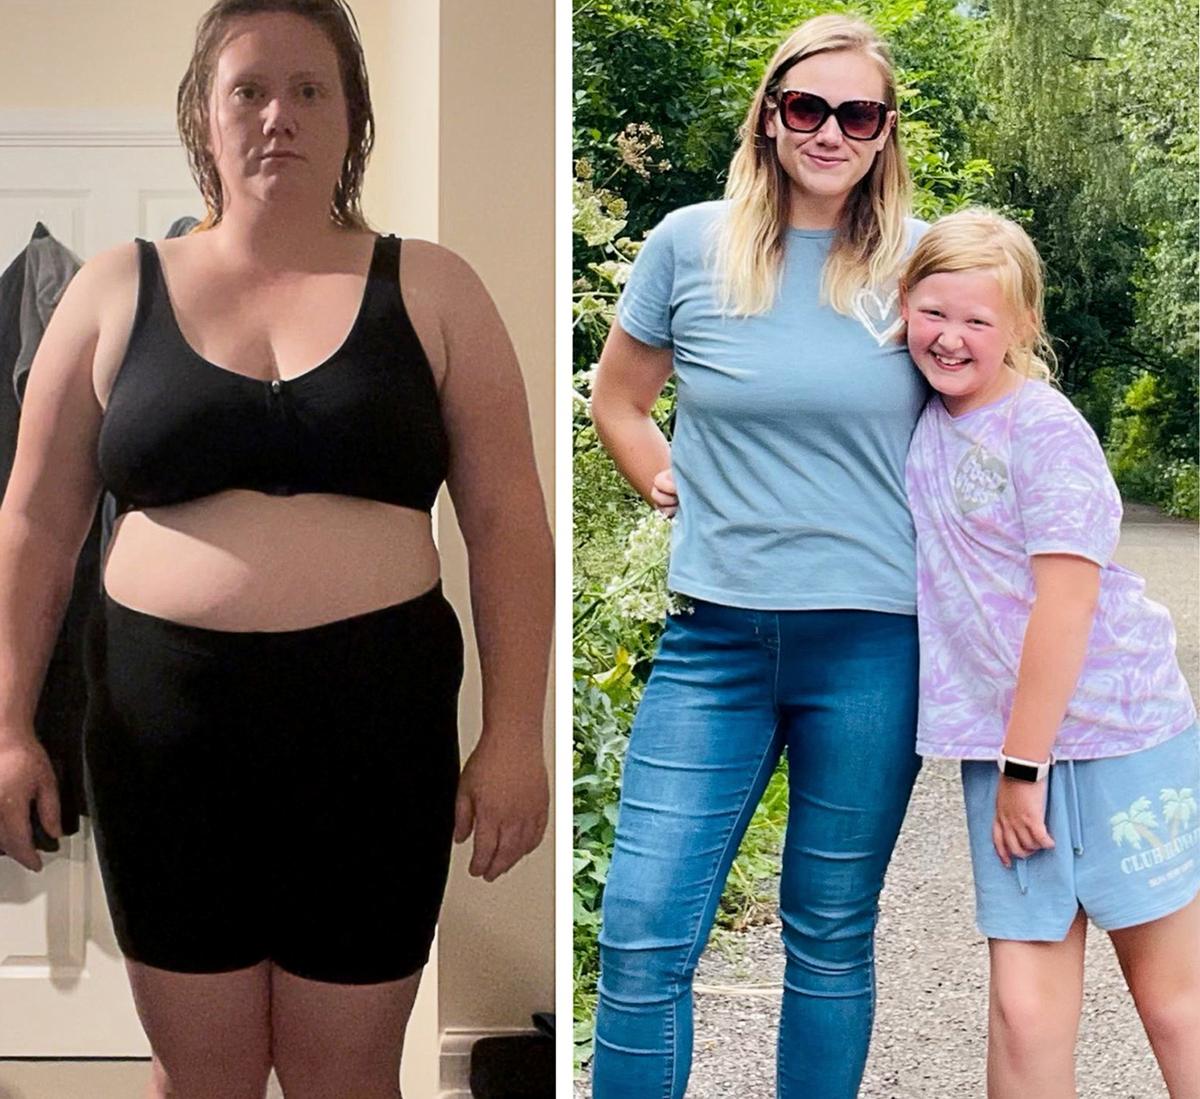 (Left) Ms. Doulton before she began her weight loss journey and (Right) Ms. Doulton with her daughter after she shed those extra pounds. (SWNS)